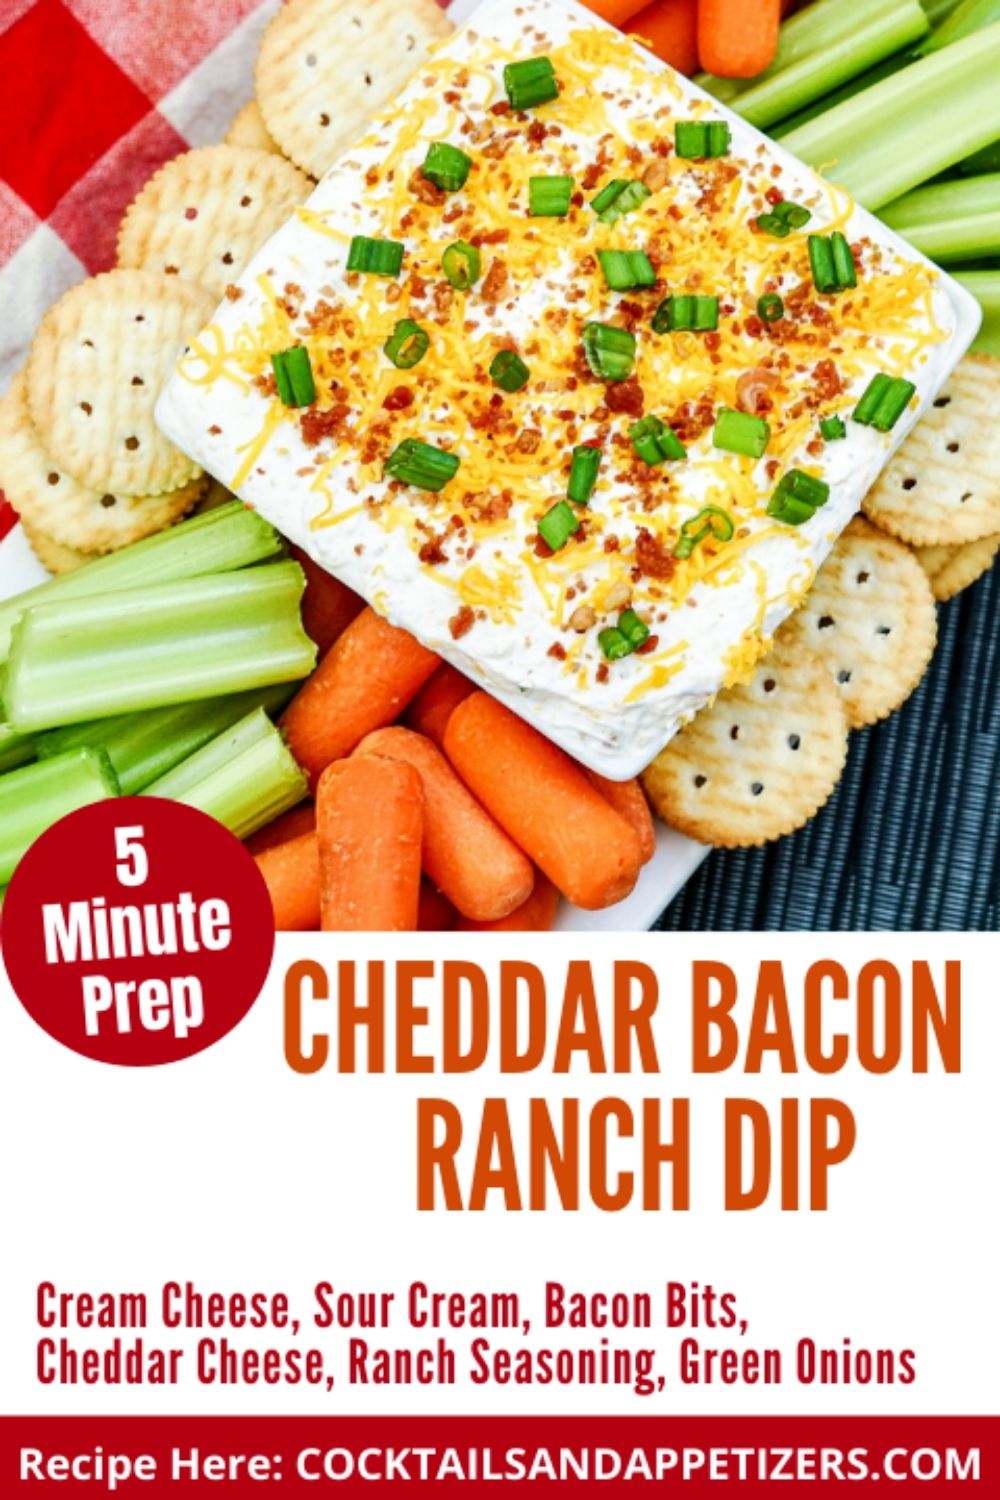 cheddar bacon ranch dip in a bowl with crackers and vegetables around it